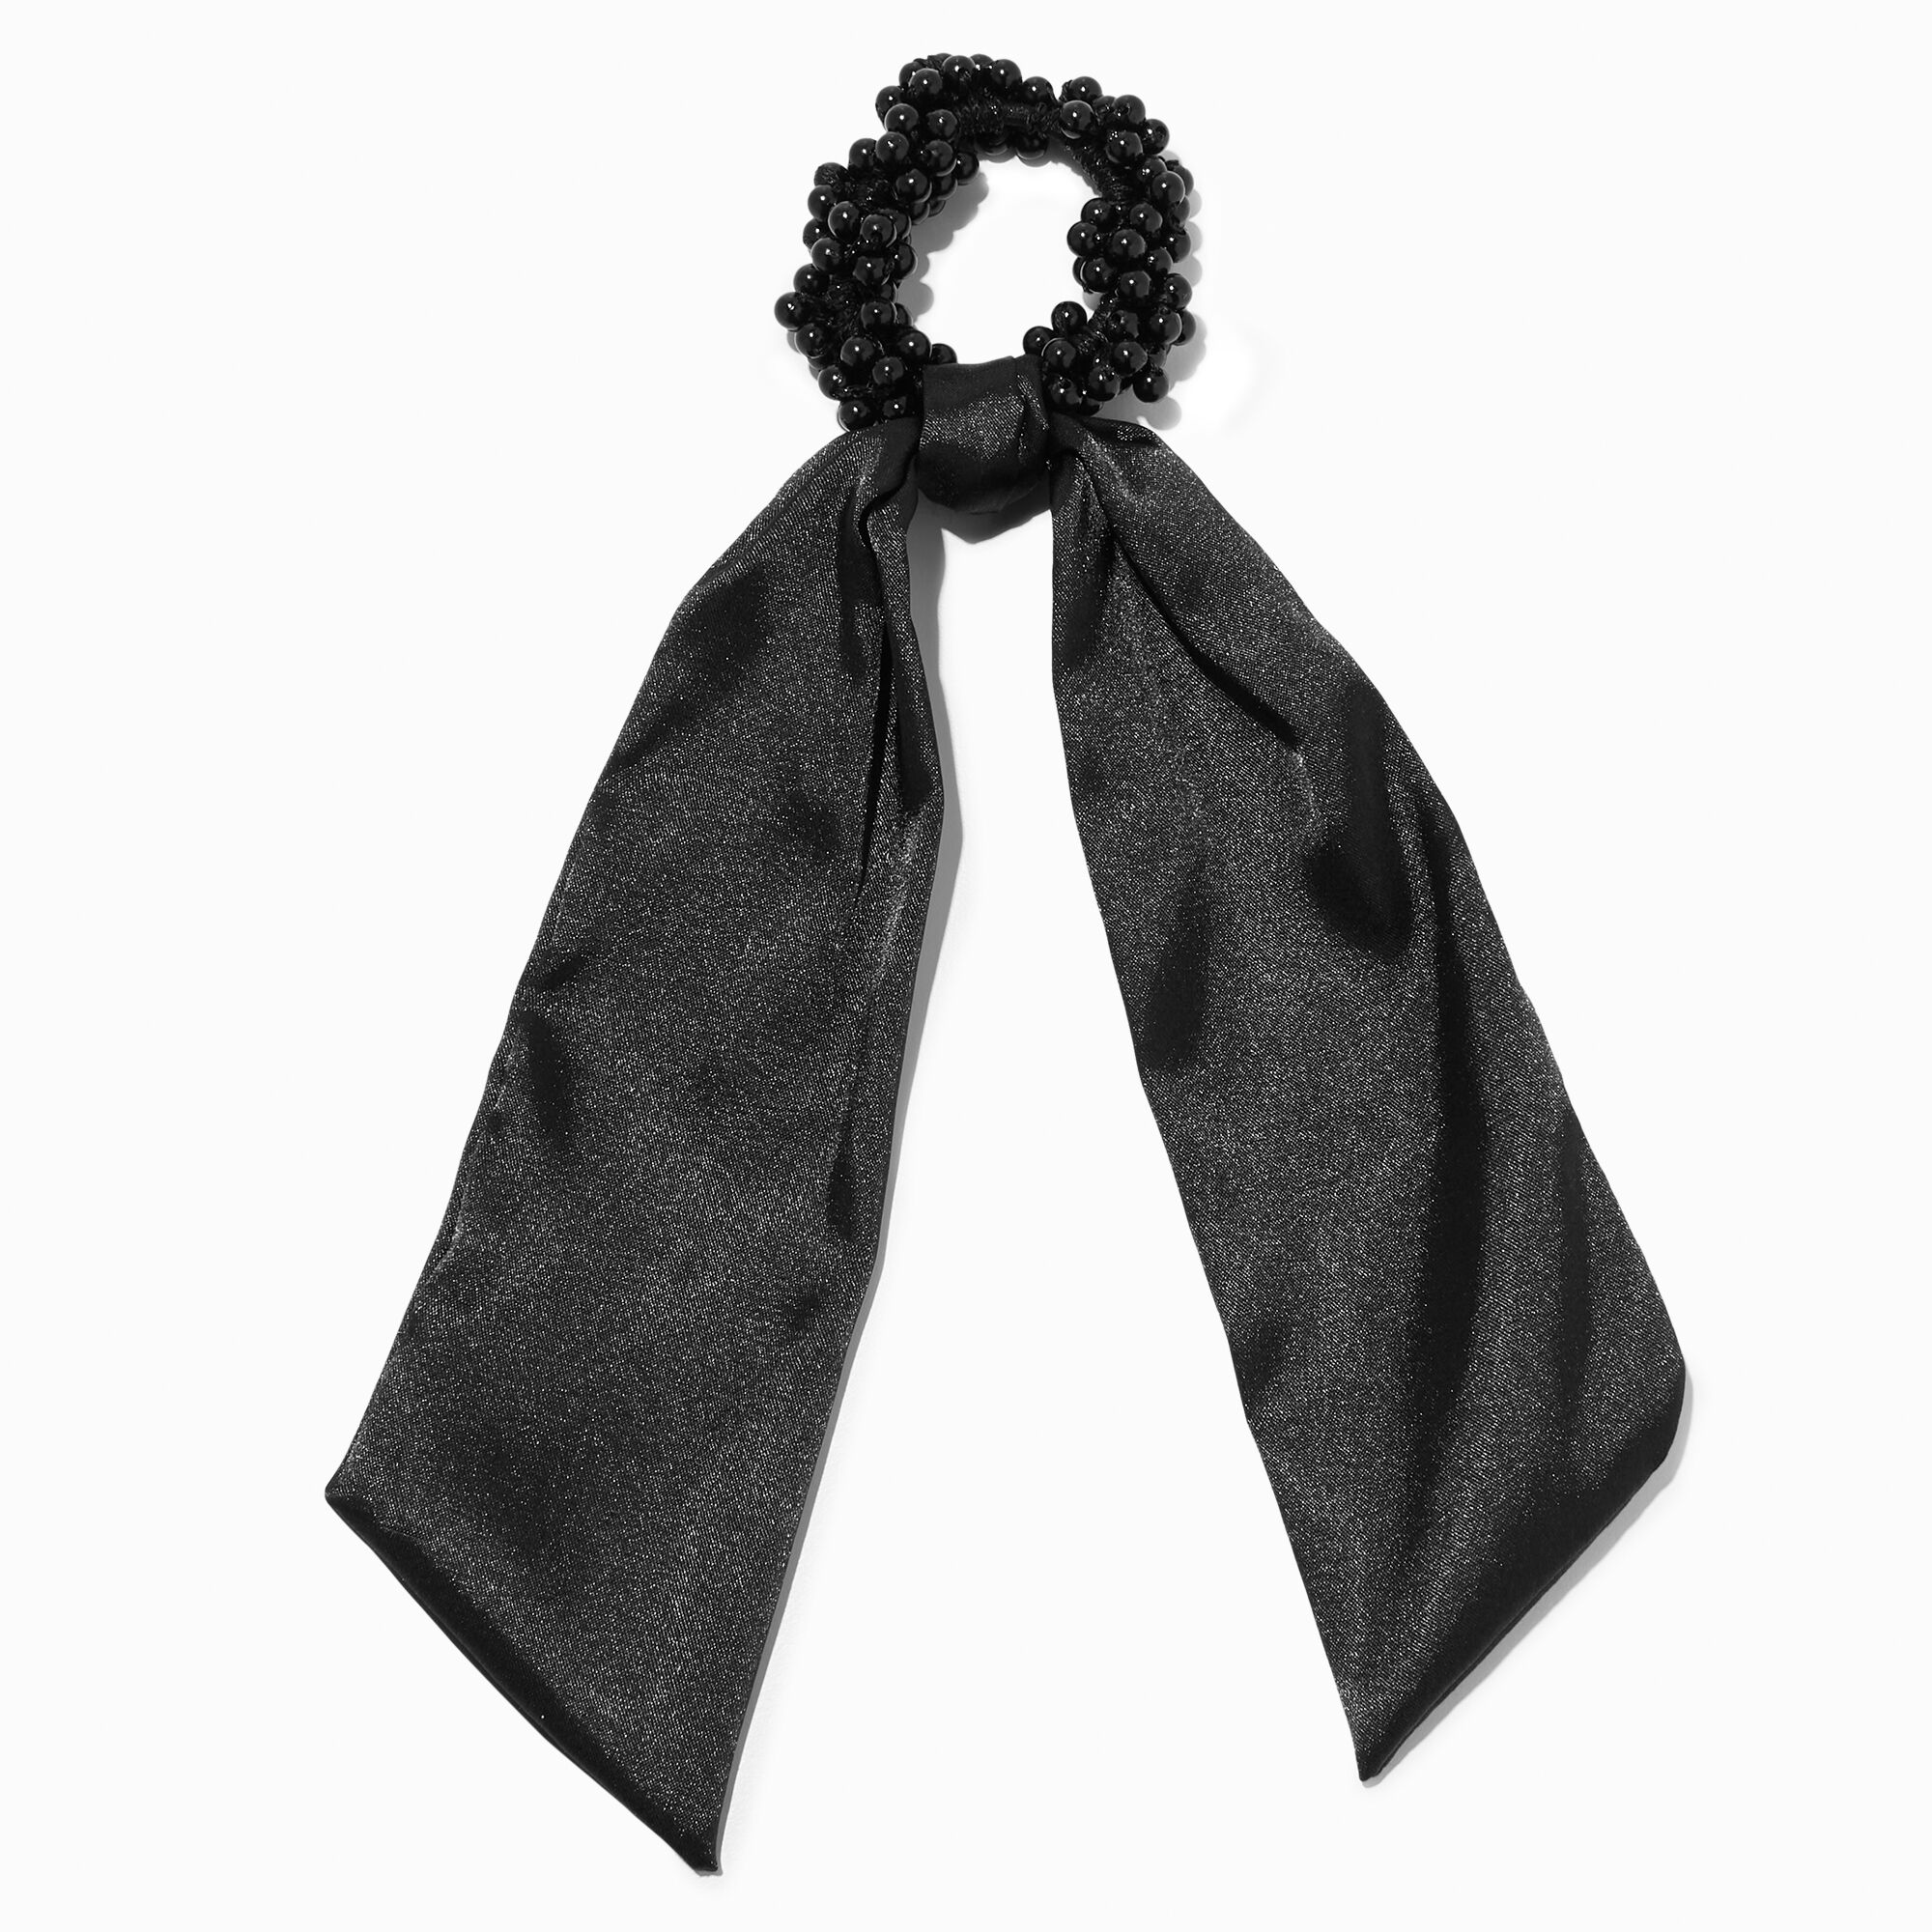 View Claires Beaded Hair Scrunchie Scarf Black information